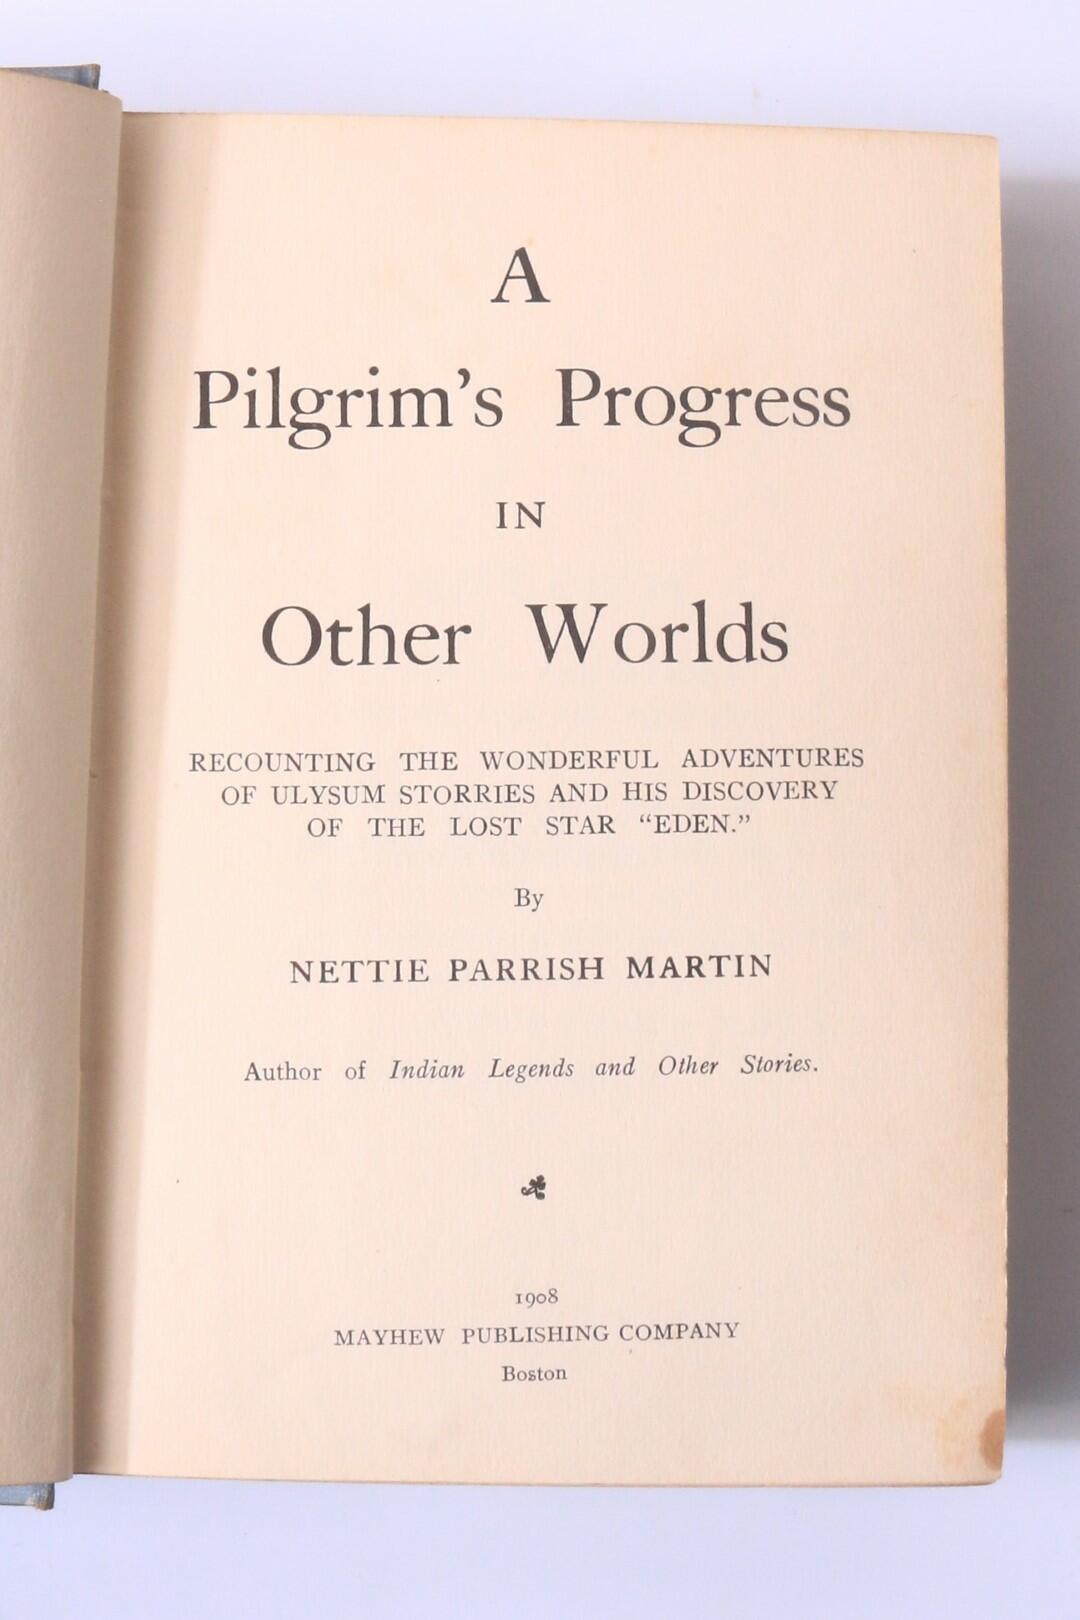 Nettie Parrish Martin - A Pilgrim's Progress in Other Worlds - Mayhew Publishing Company, 1908, First Edition.